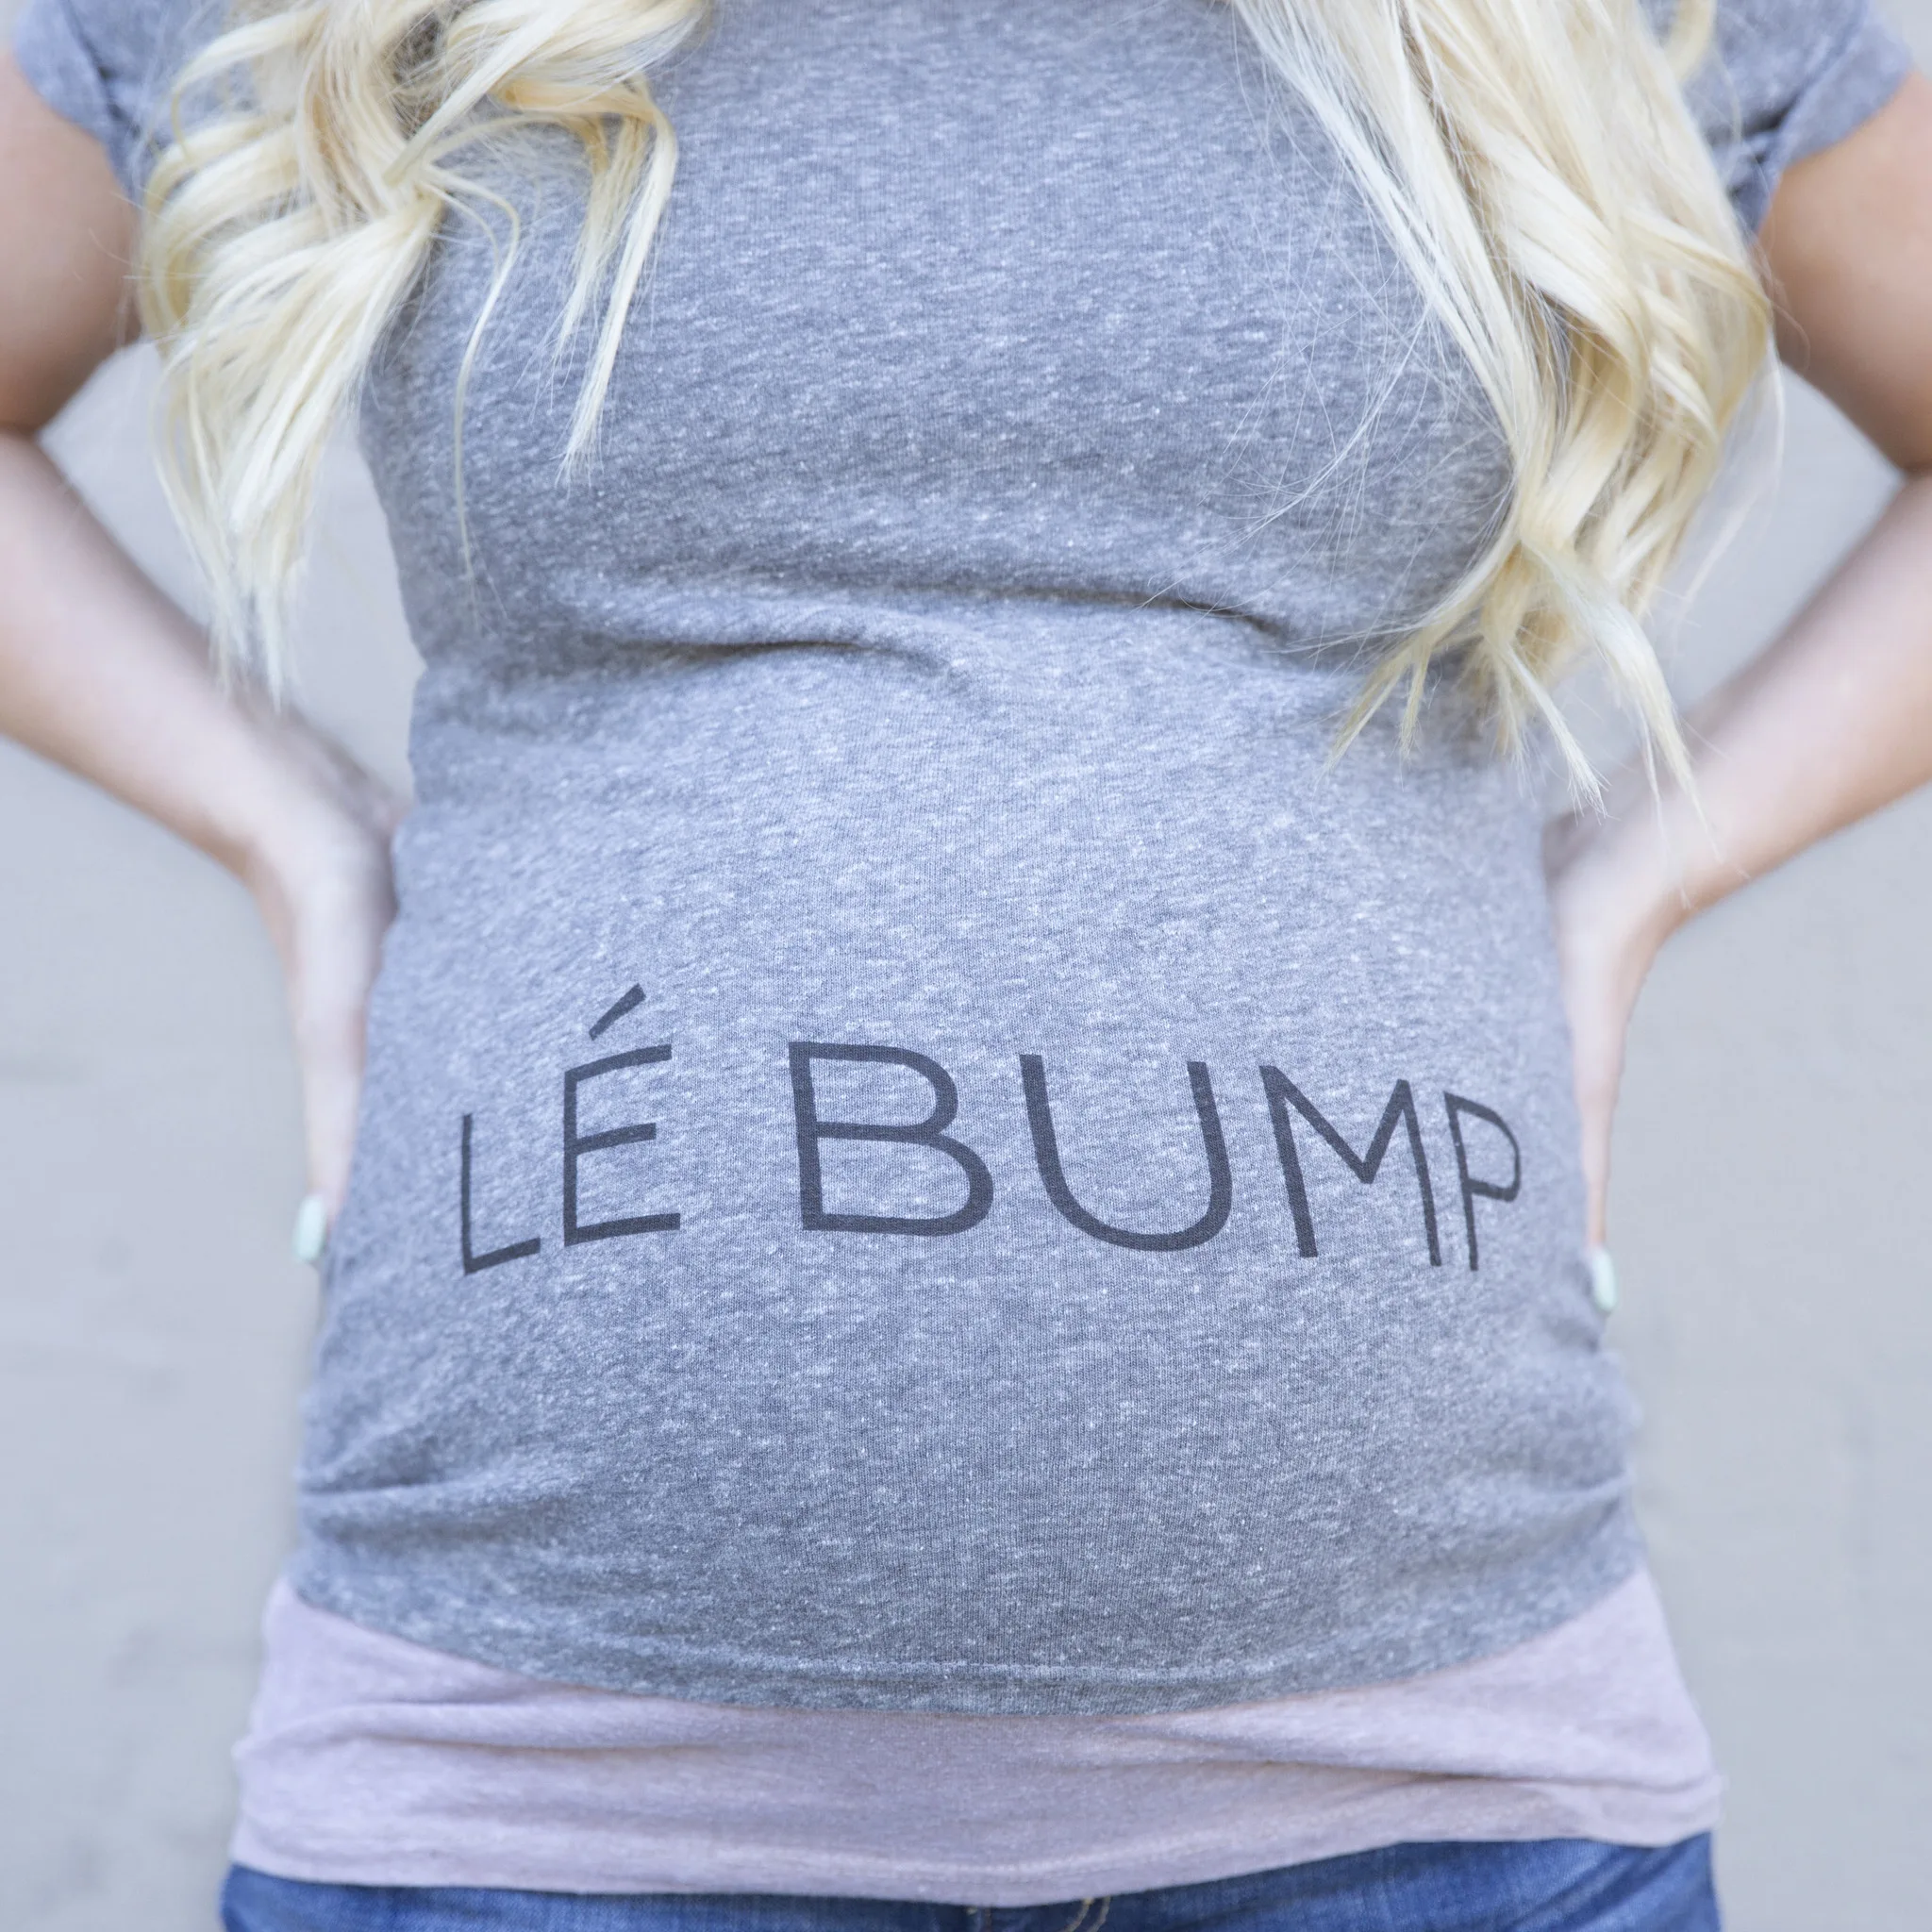 Le Bump Tee from The Project Nursery Shop